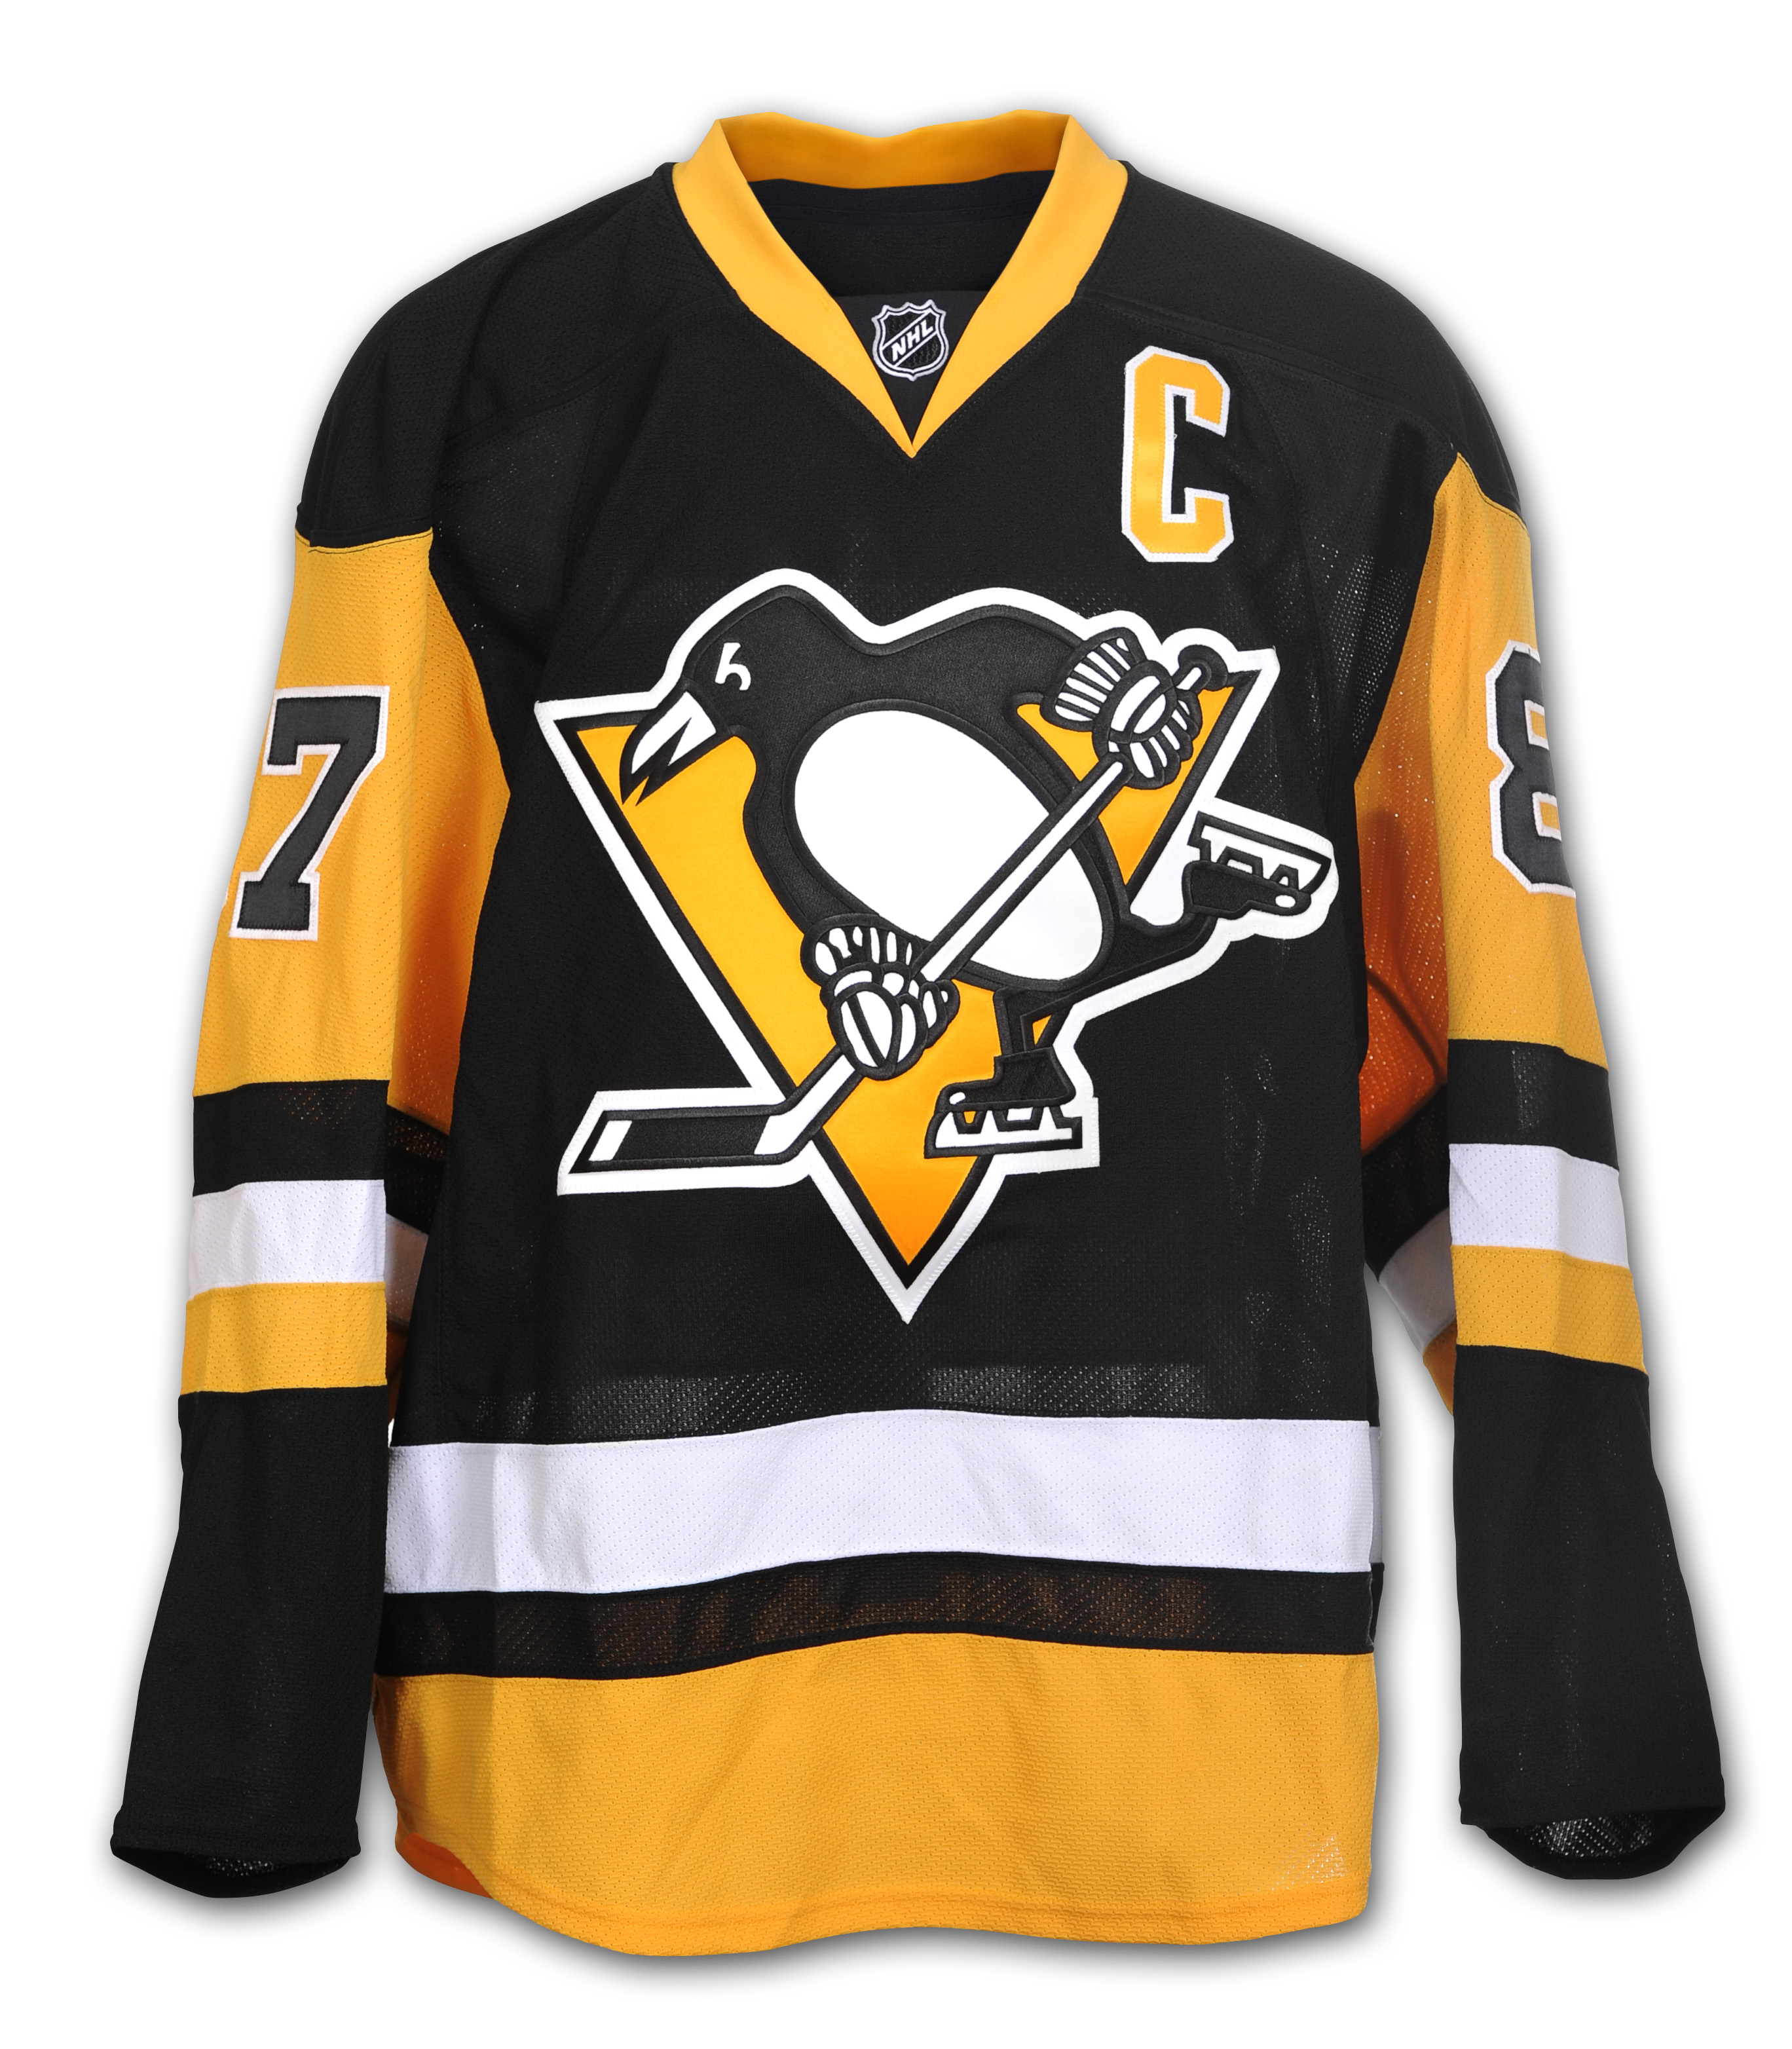 Pittsburgh Penguins' third jersey has a 